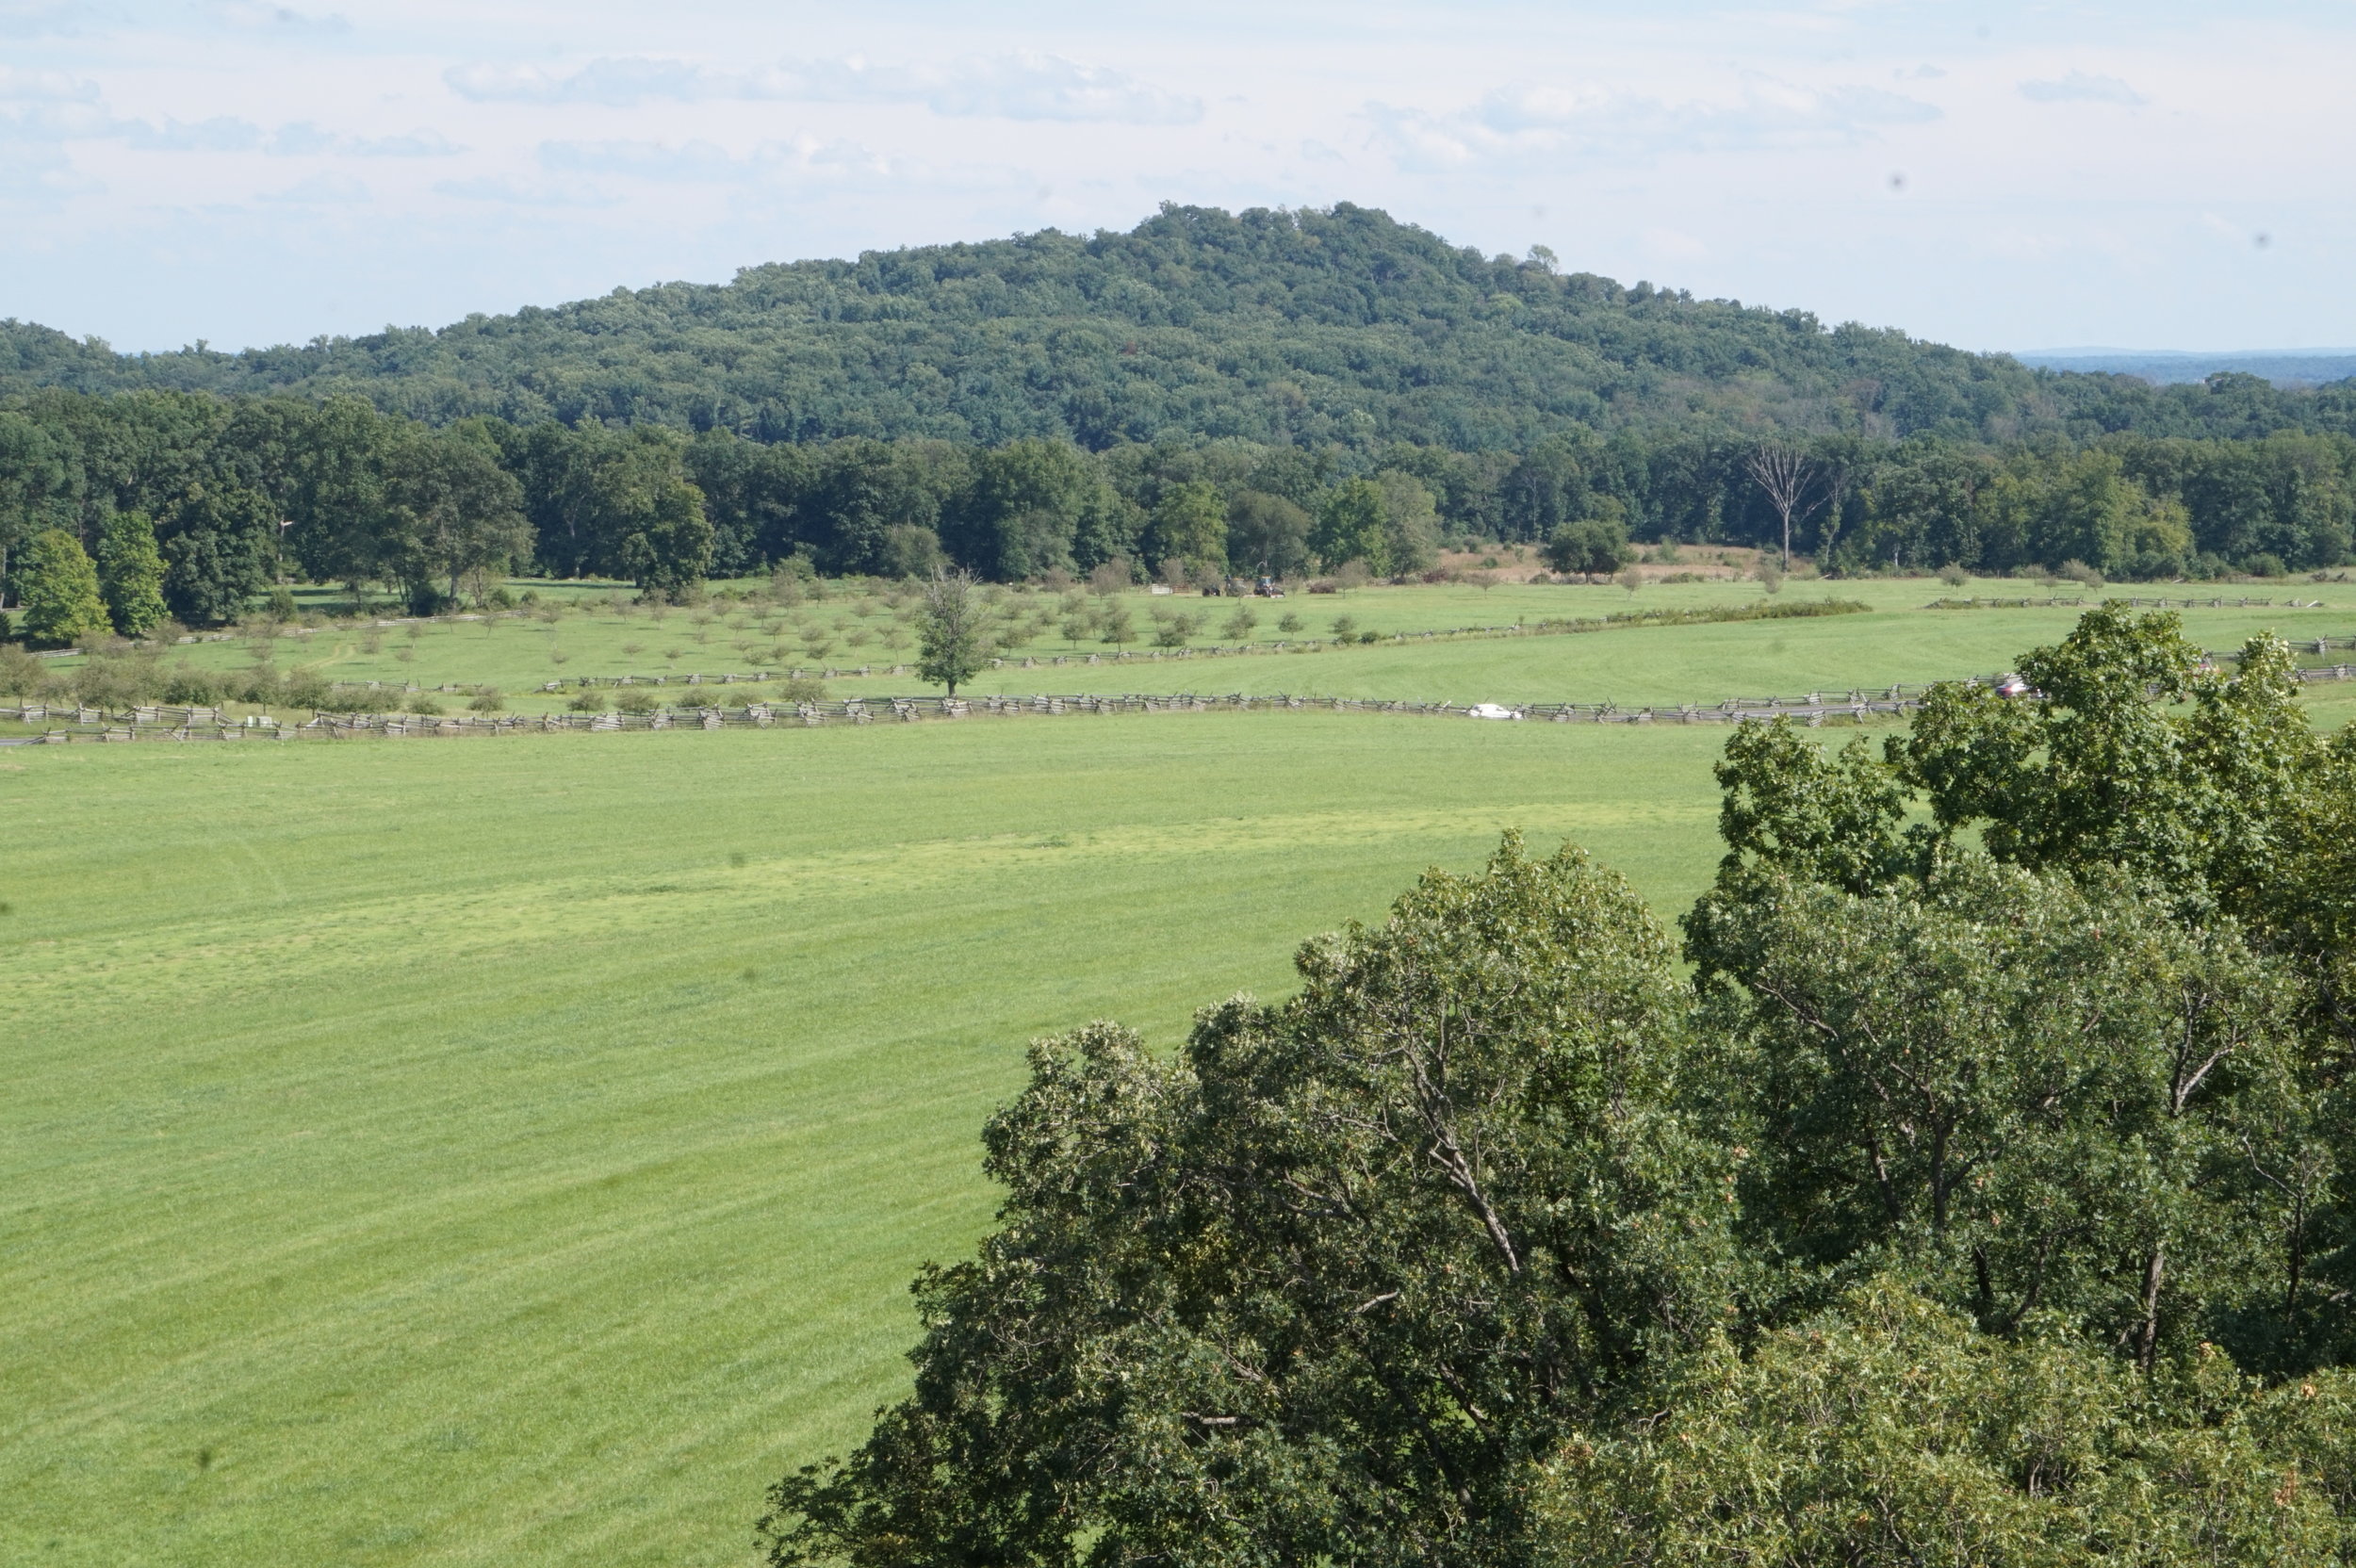  Big Round Top, viewed from the observation tower near Millerstown Road. 